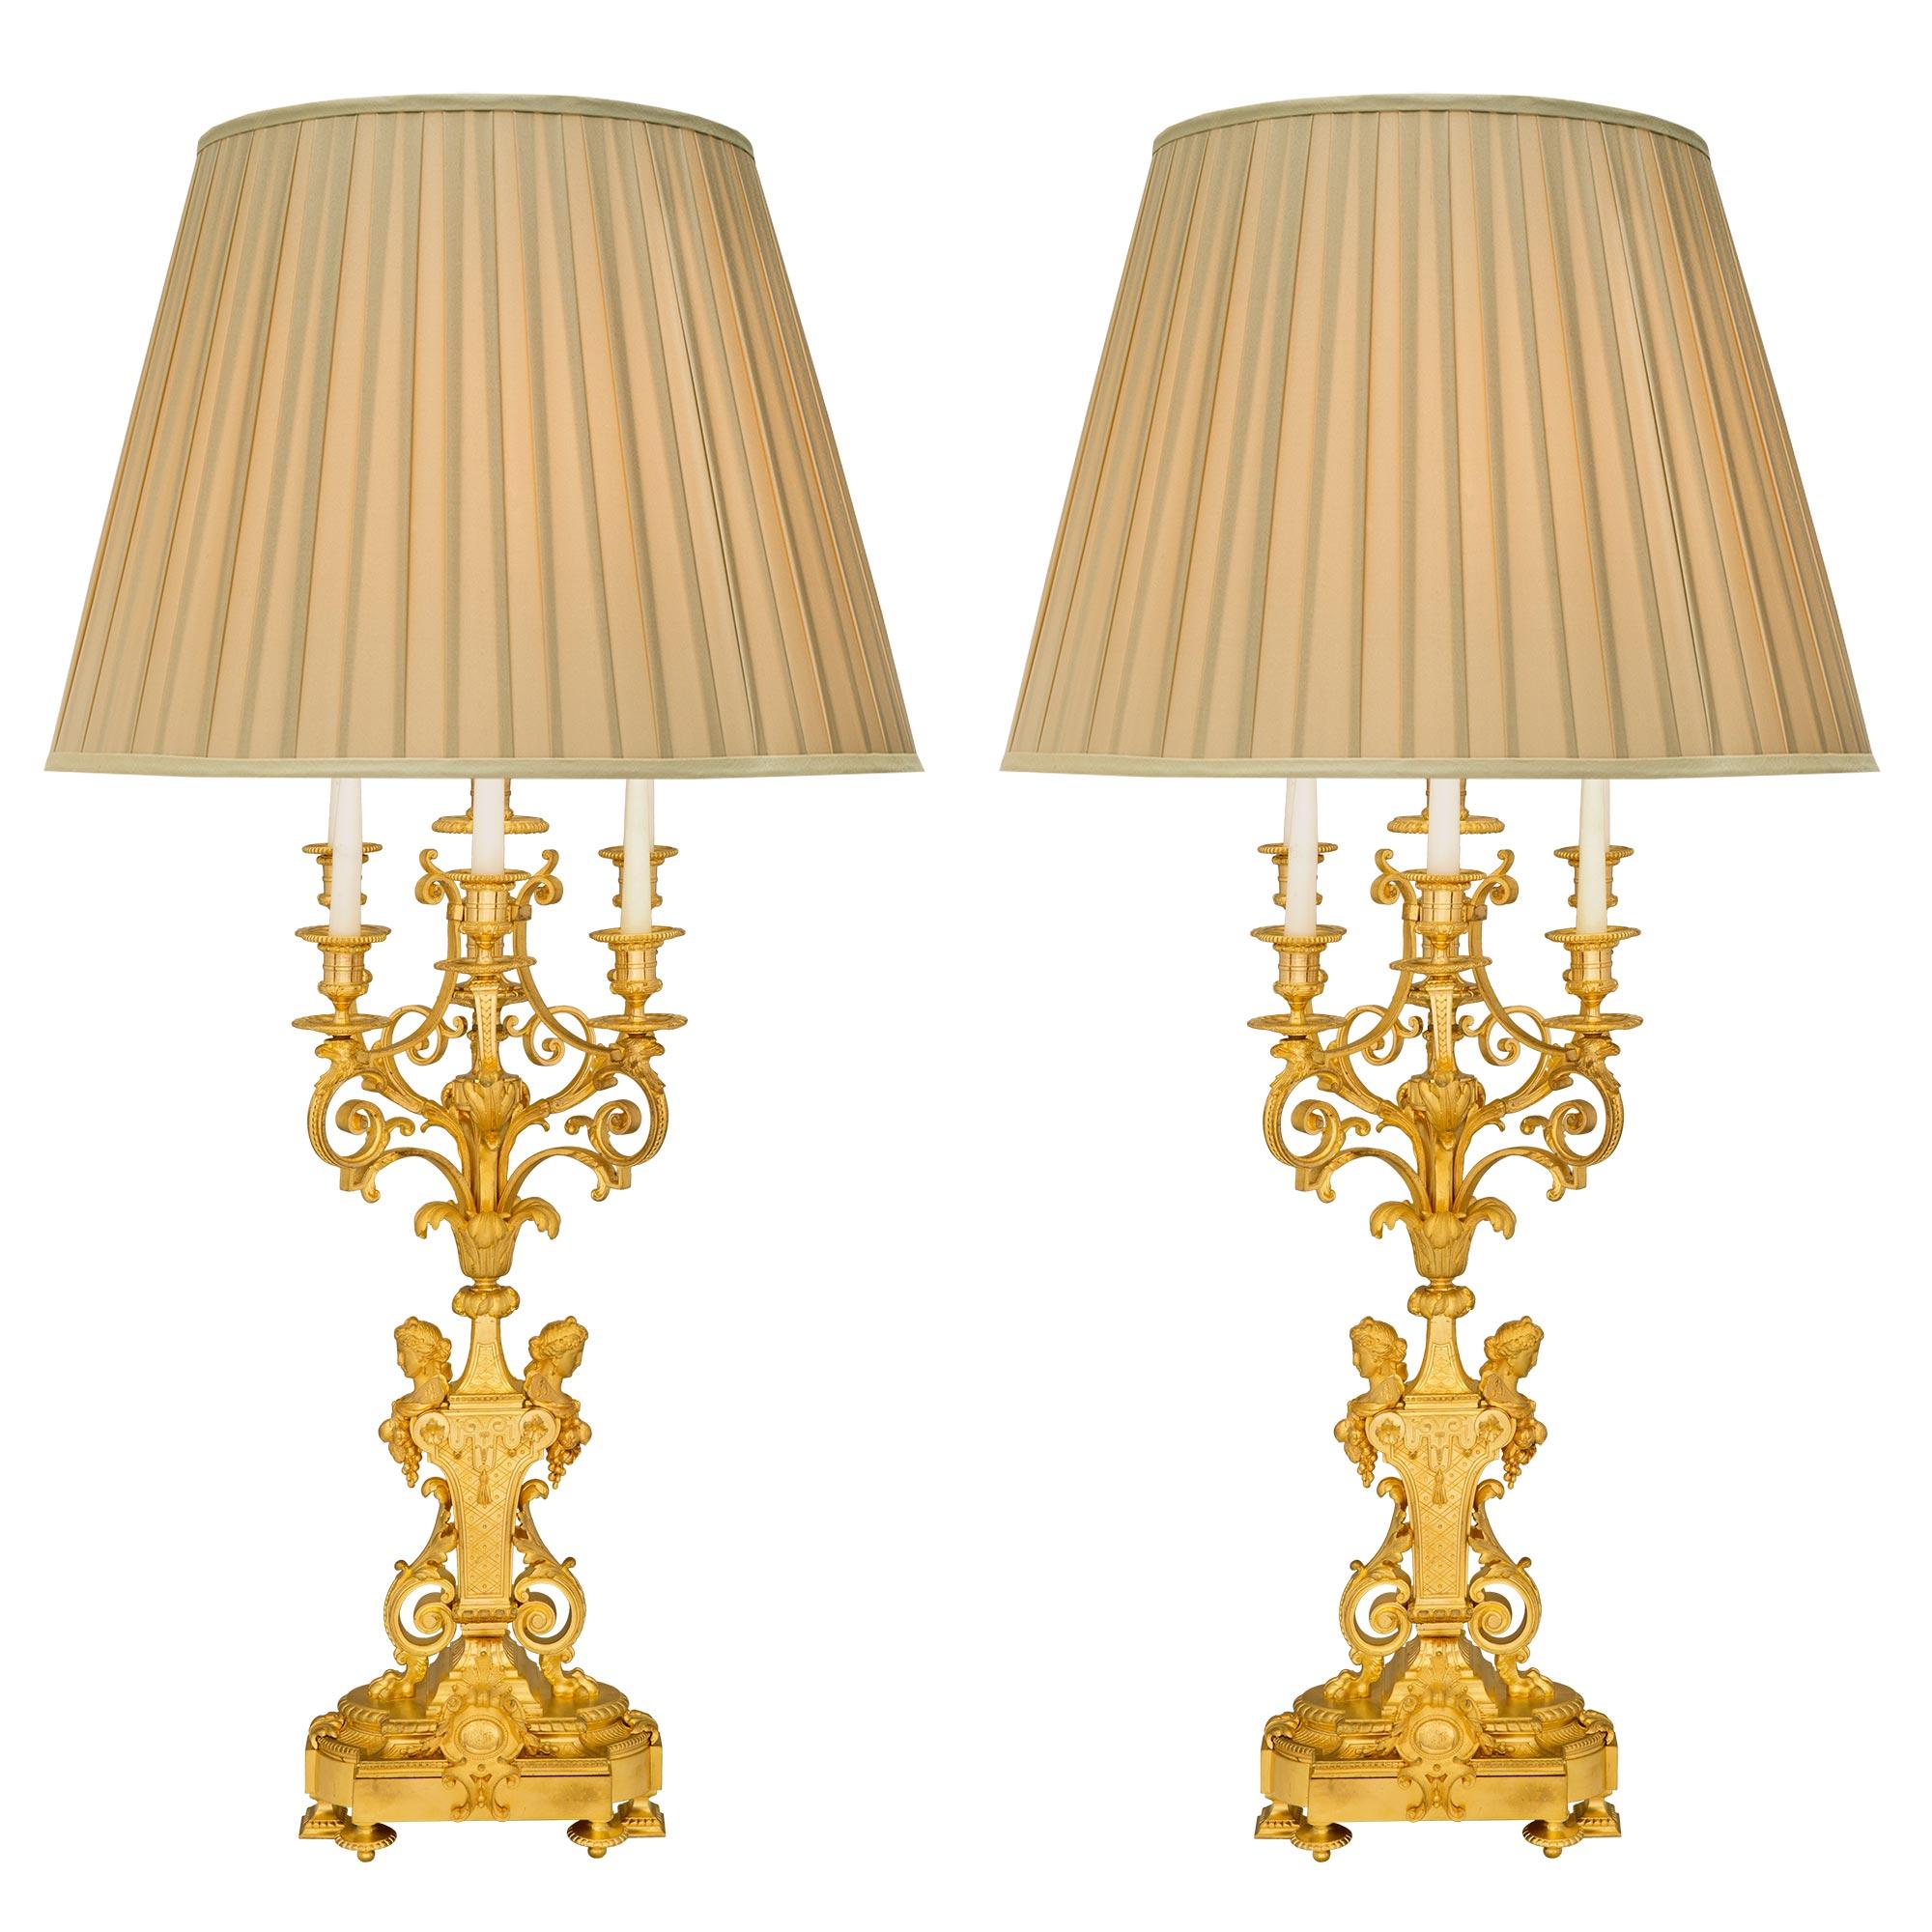 Pair of French 19th Century Louis XVI Style Belle Époque Period Ormolu Lamps For Sale